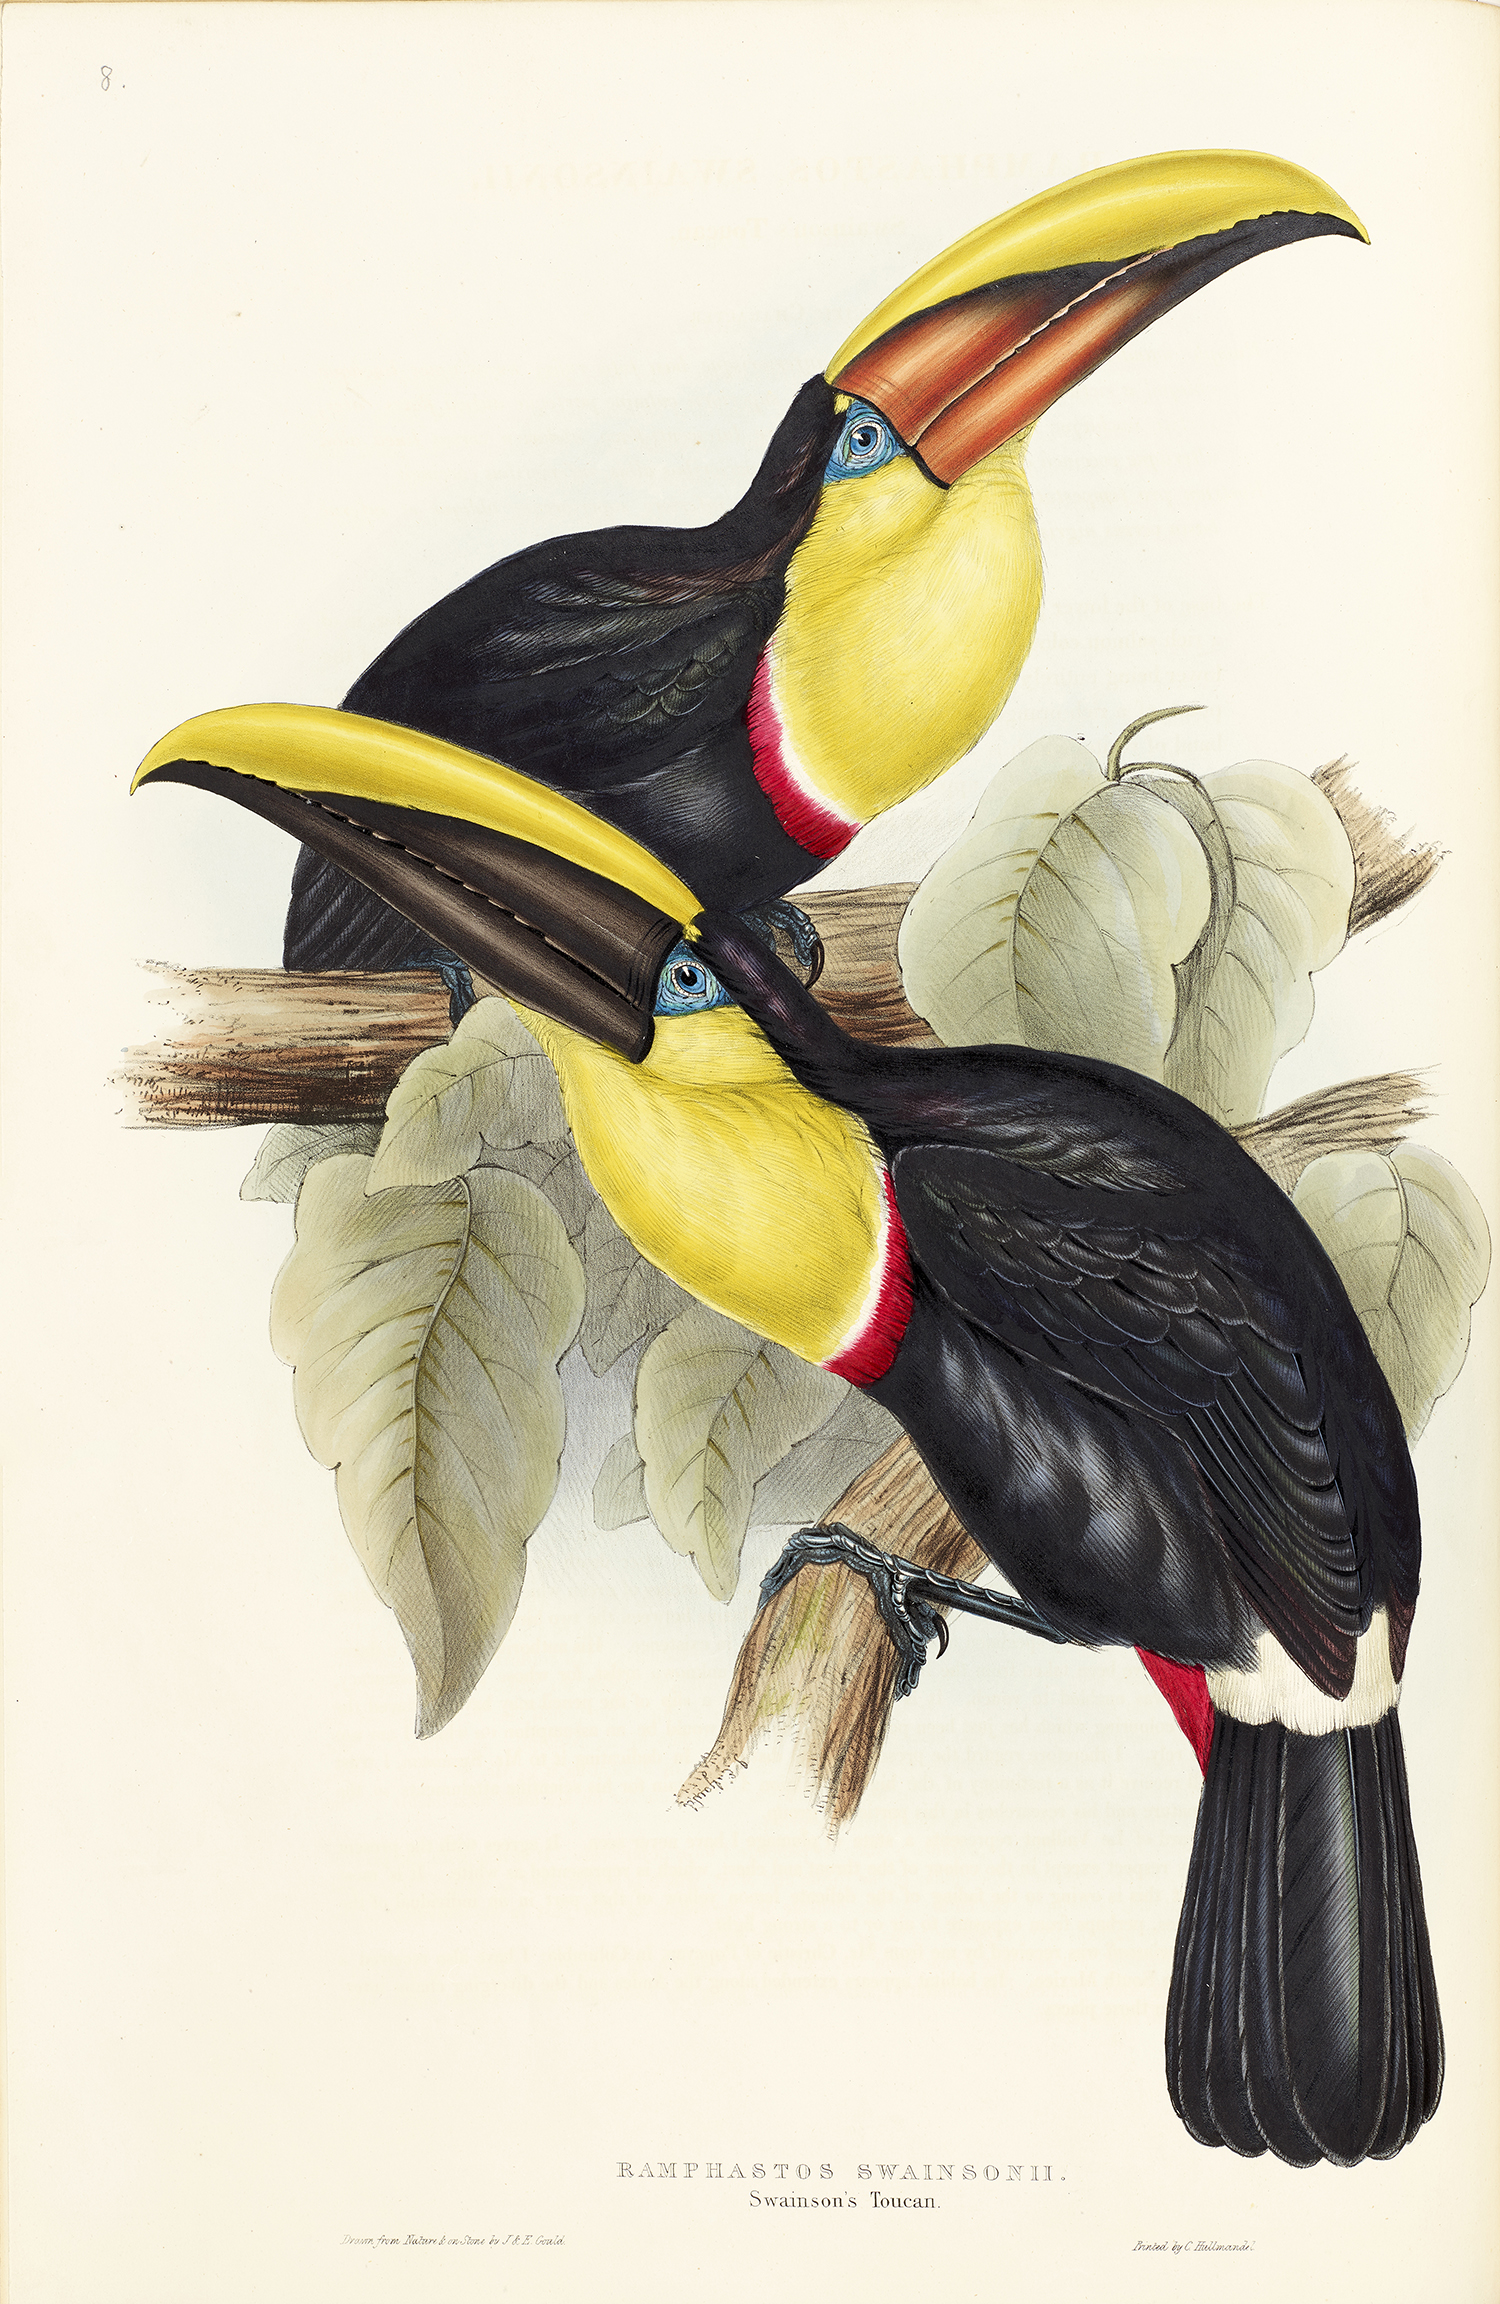 Elizabeth Gould's toucan illustration of 2 toucans perched on a forking branch with leaves, both black with a yellow throat and orange and yellow bill, one facing right and one facing left.